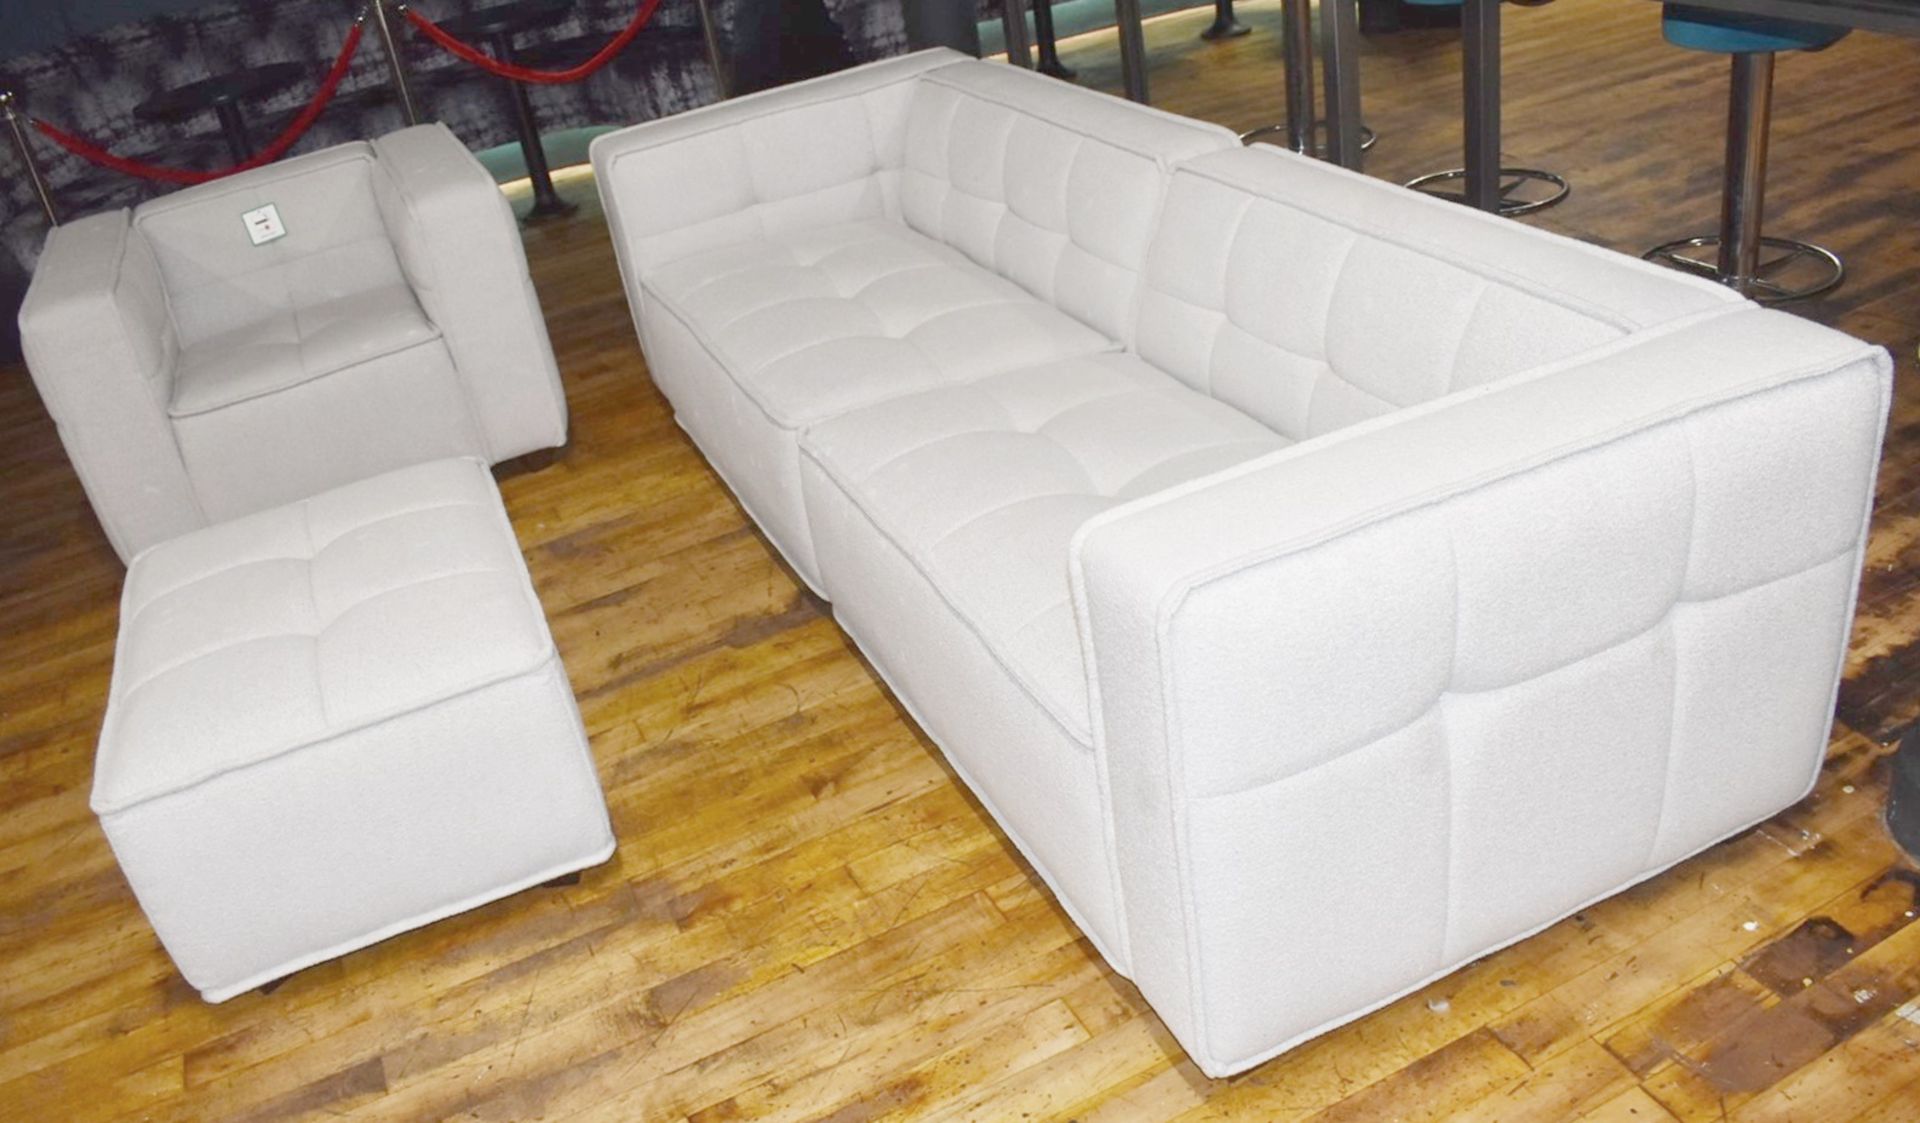 3-Piece Sofa Set, Upholstered with a Premium Upholstery in a Neutral Tone - Image 3 of 7